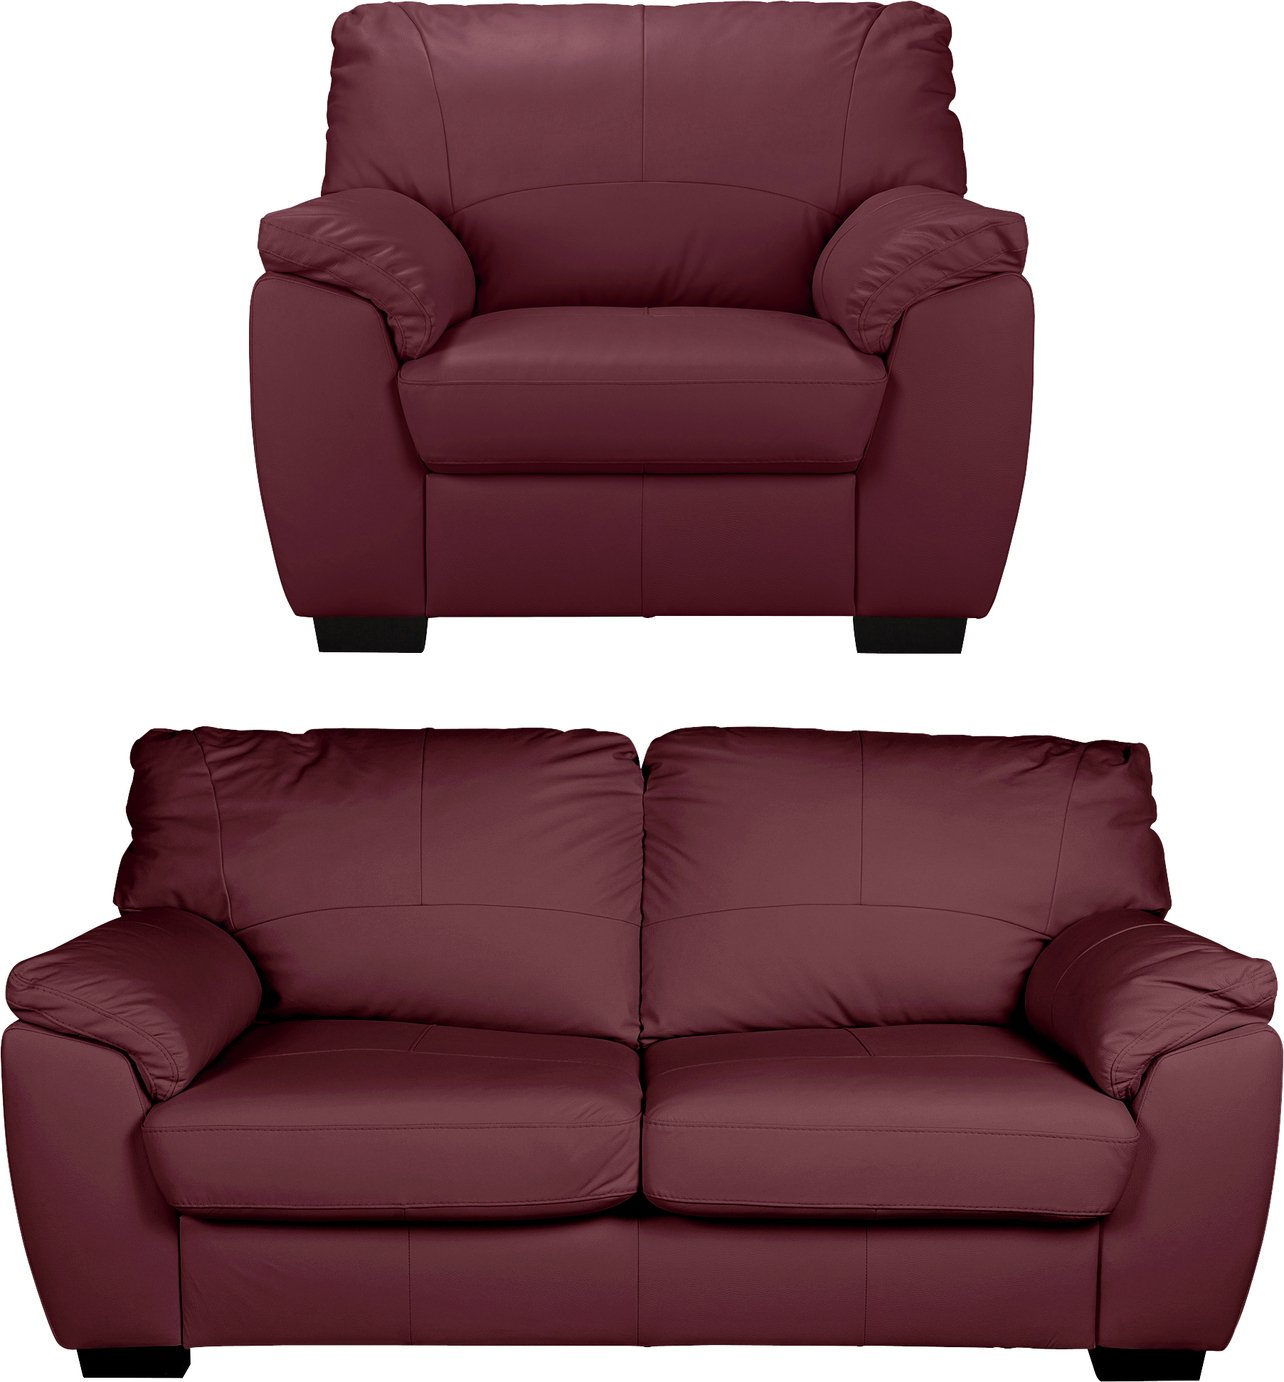 Argos Home Milano Leather Chair and 3 Seater Sofa Burgundy